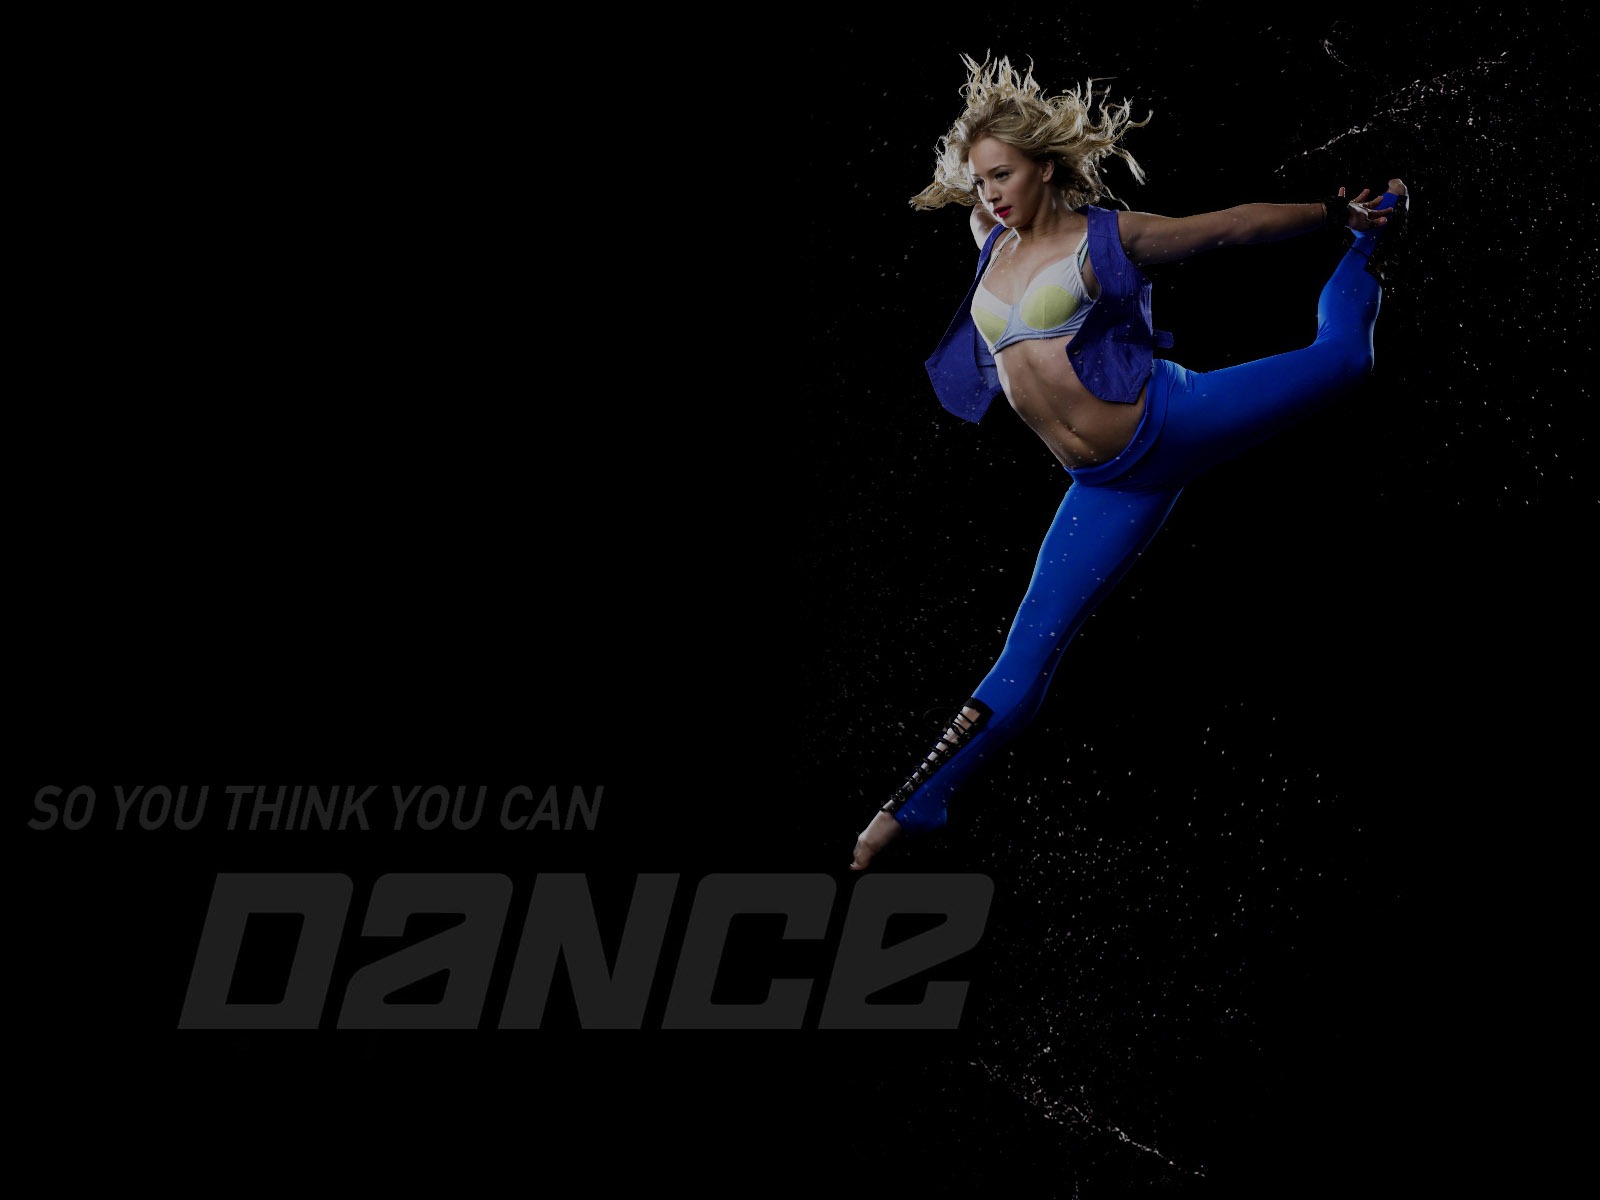 So You Think You Can Dance wallpaper (2) #19 - 1600x1200